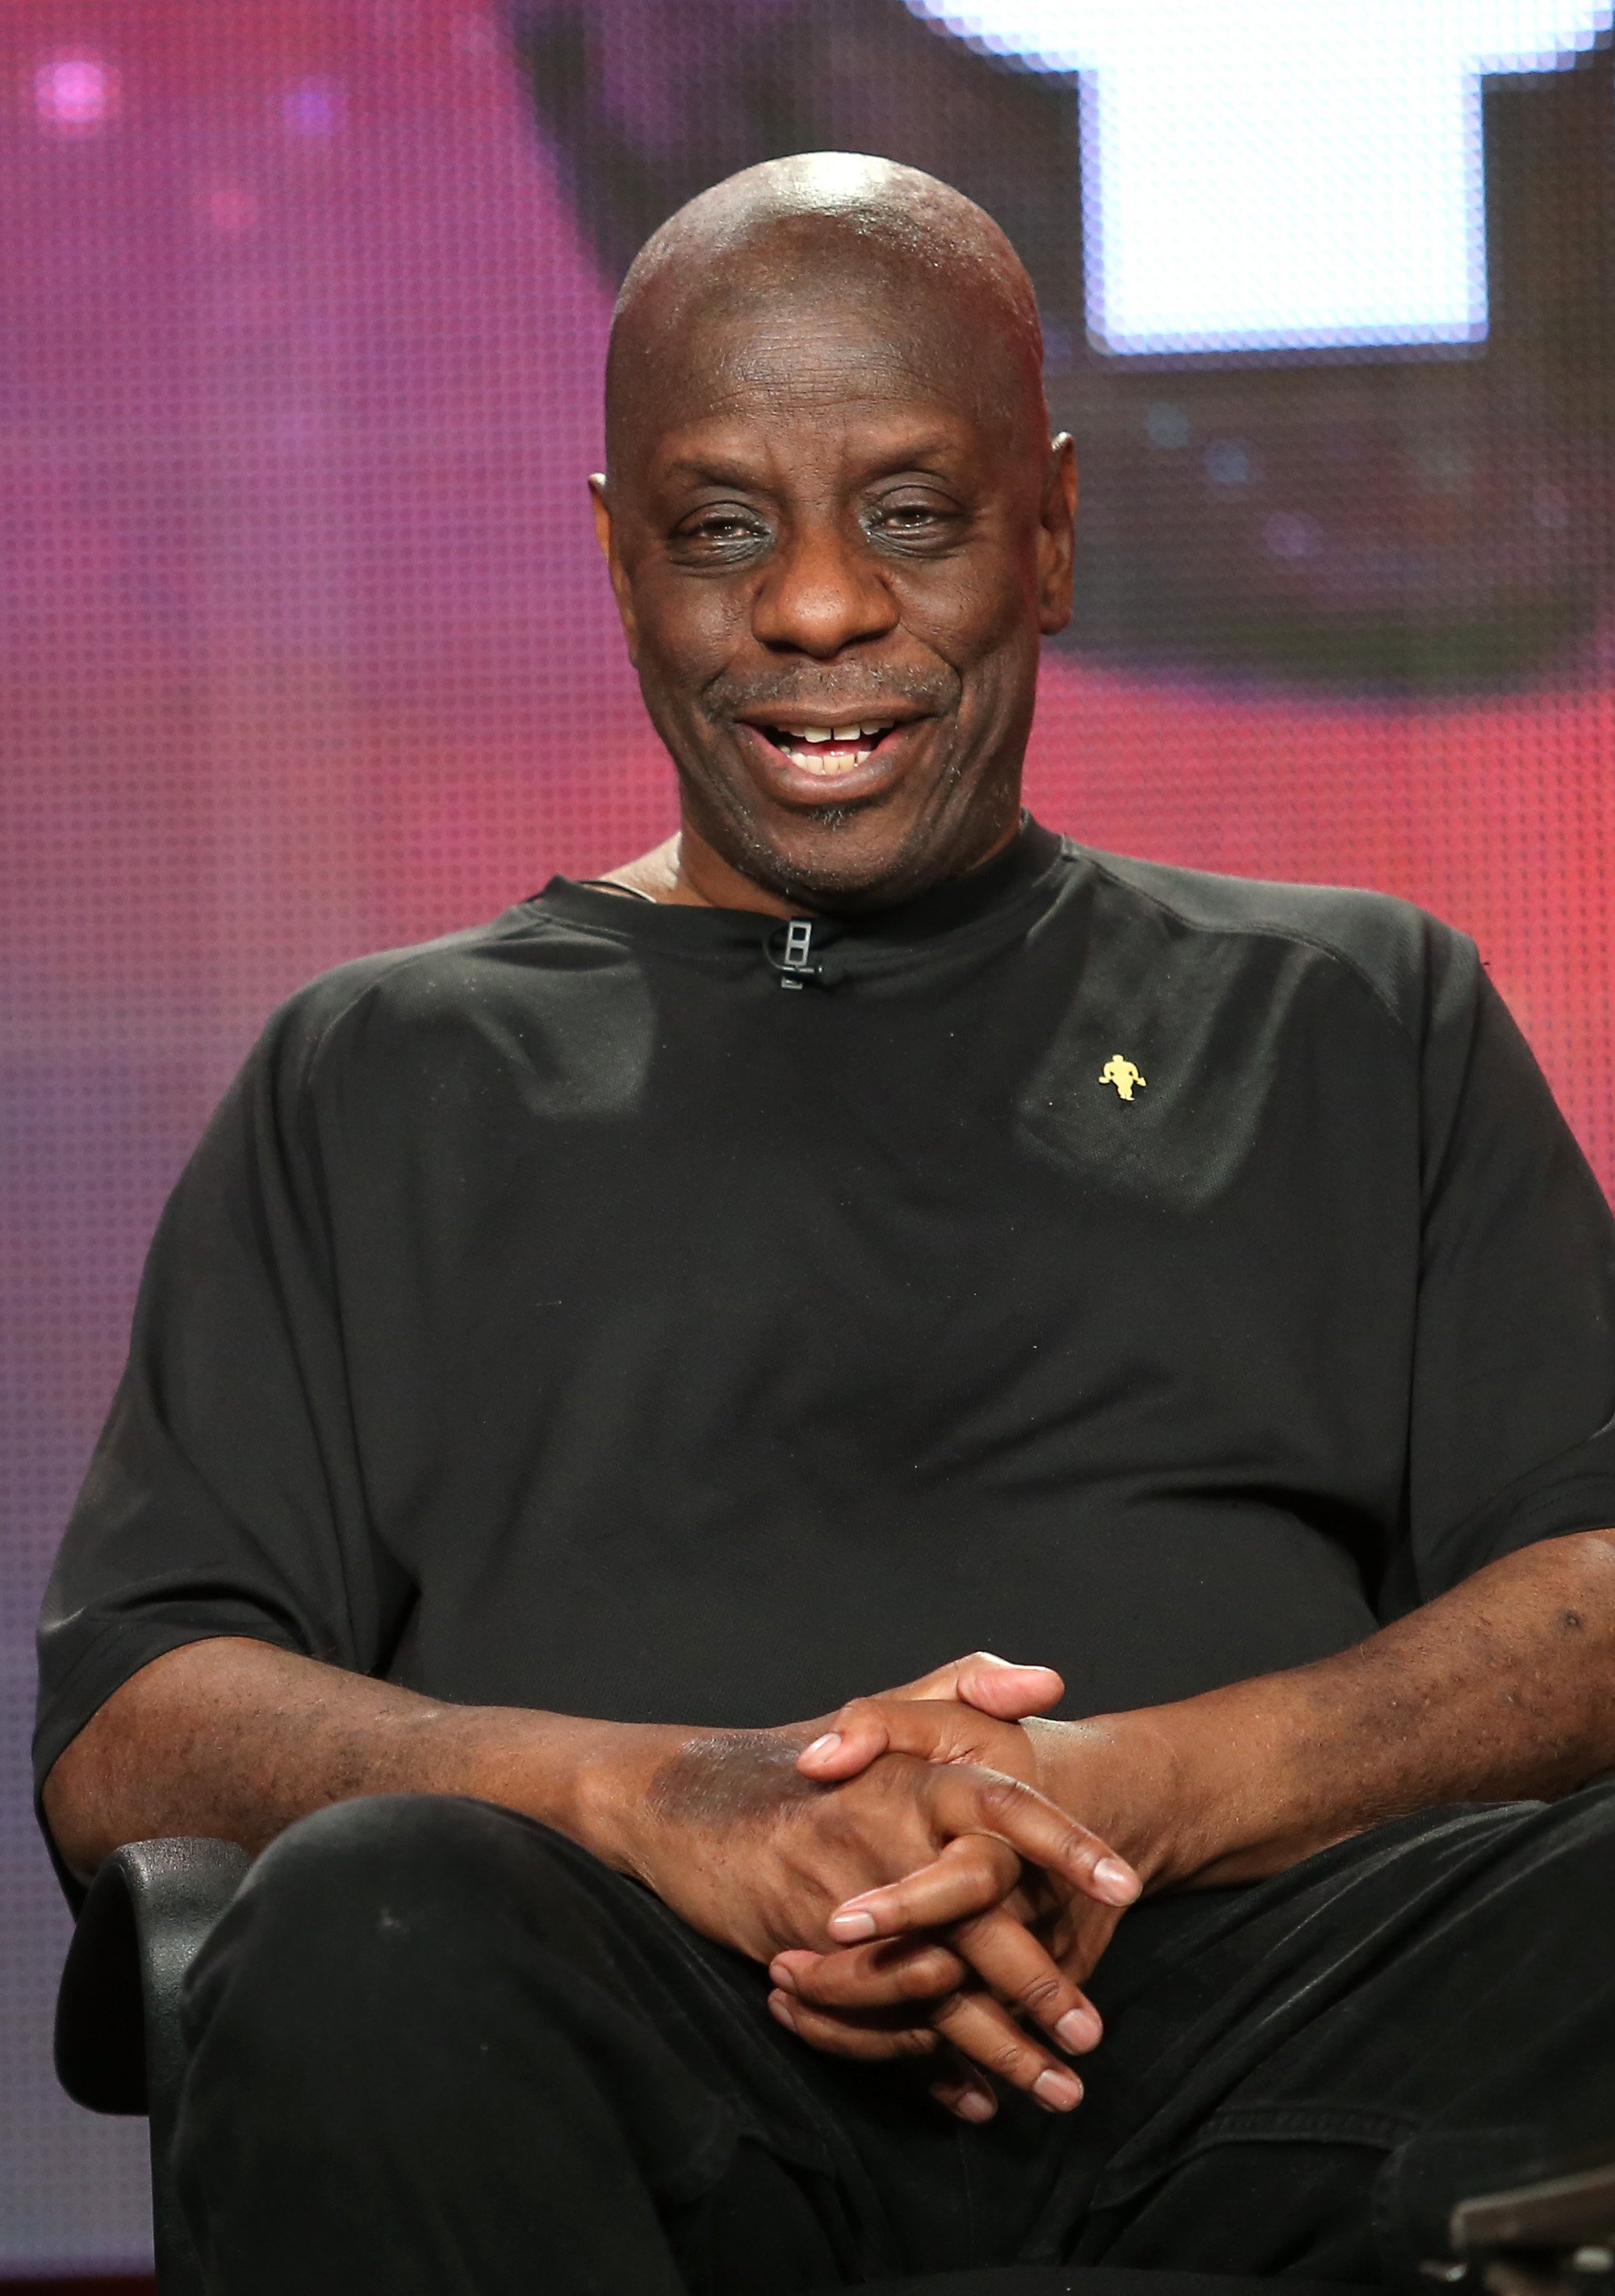  Jimmie Walker at the PBS portion of the 2014 Winter Television Critics Association tour on January 21, 2014  | Photo: Getty Images